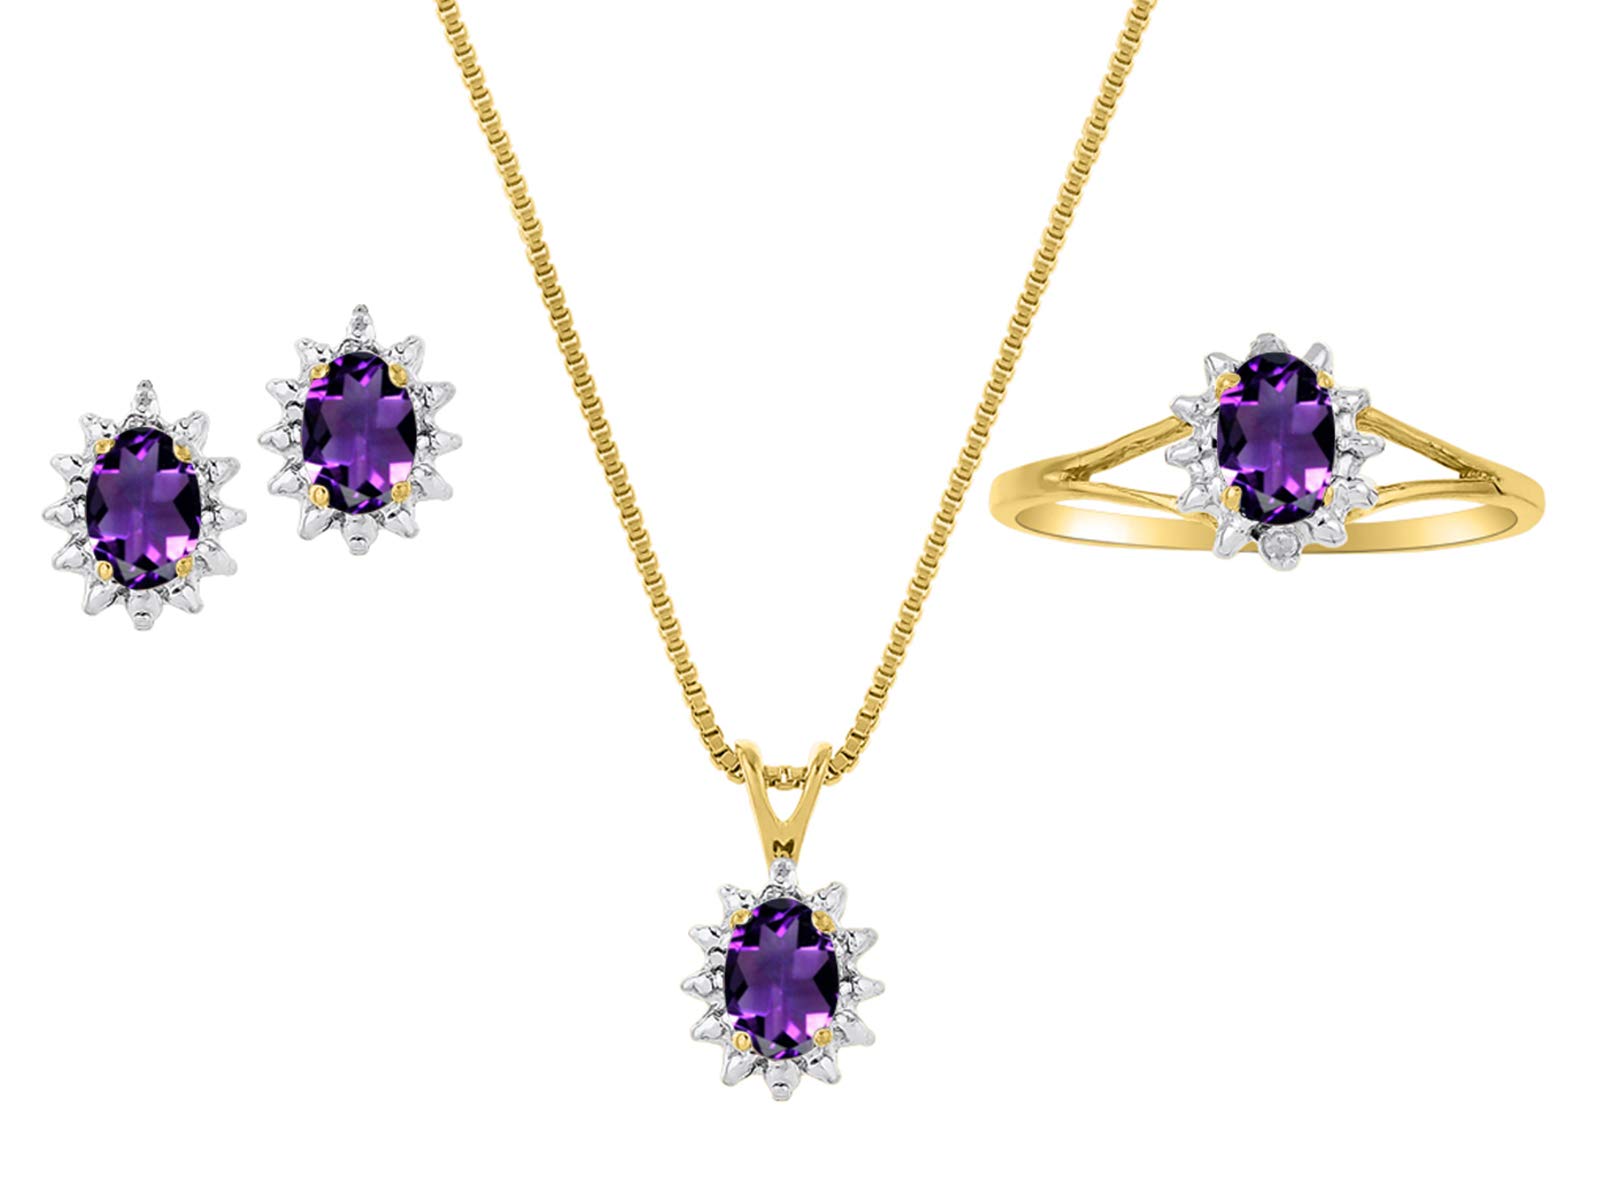 Rylos Simply Elegant Beautiful Amethyst & Diamond Matching Set - Ring, Earrings and Pendant Necklace - February Birthstone*